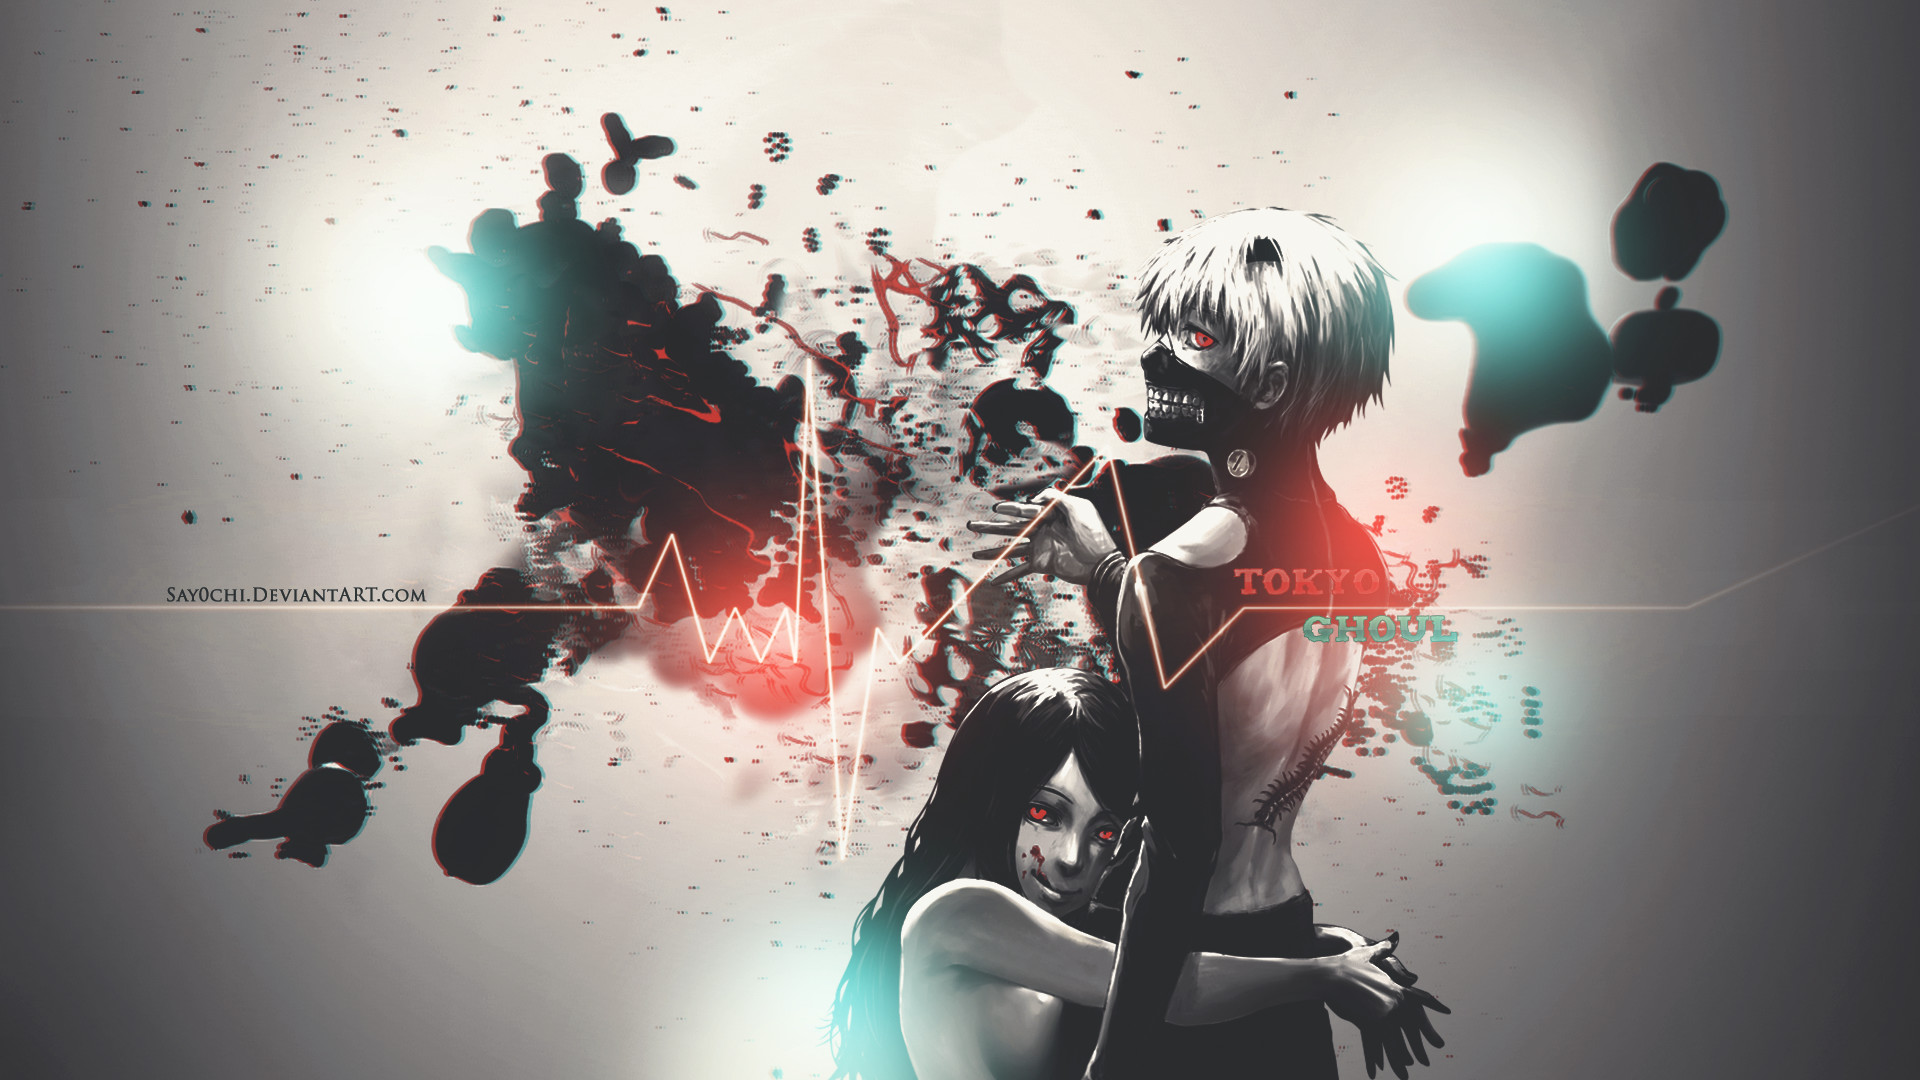 1920x1080 ... Tokyo Ghoul Wallpaper 1920 x 1080 [HD] by Say0chi